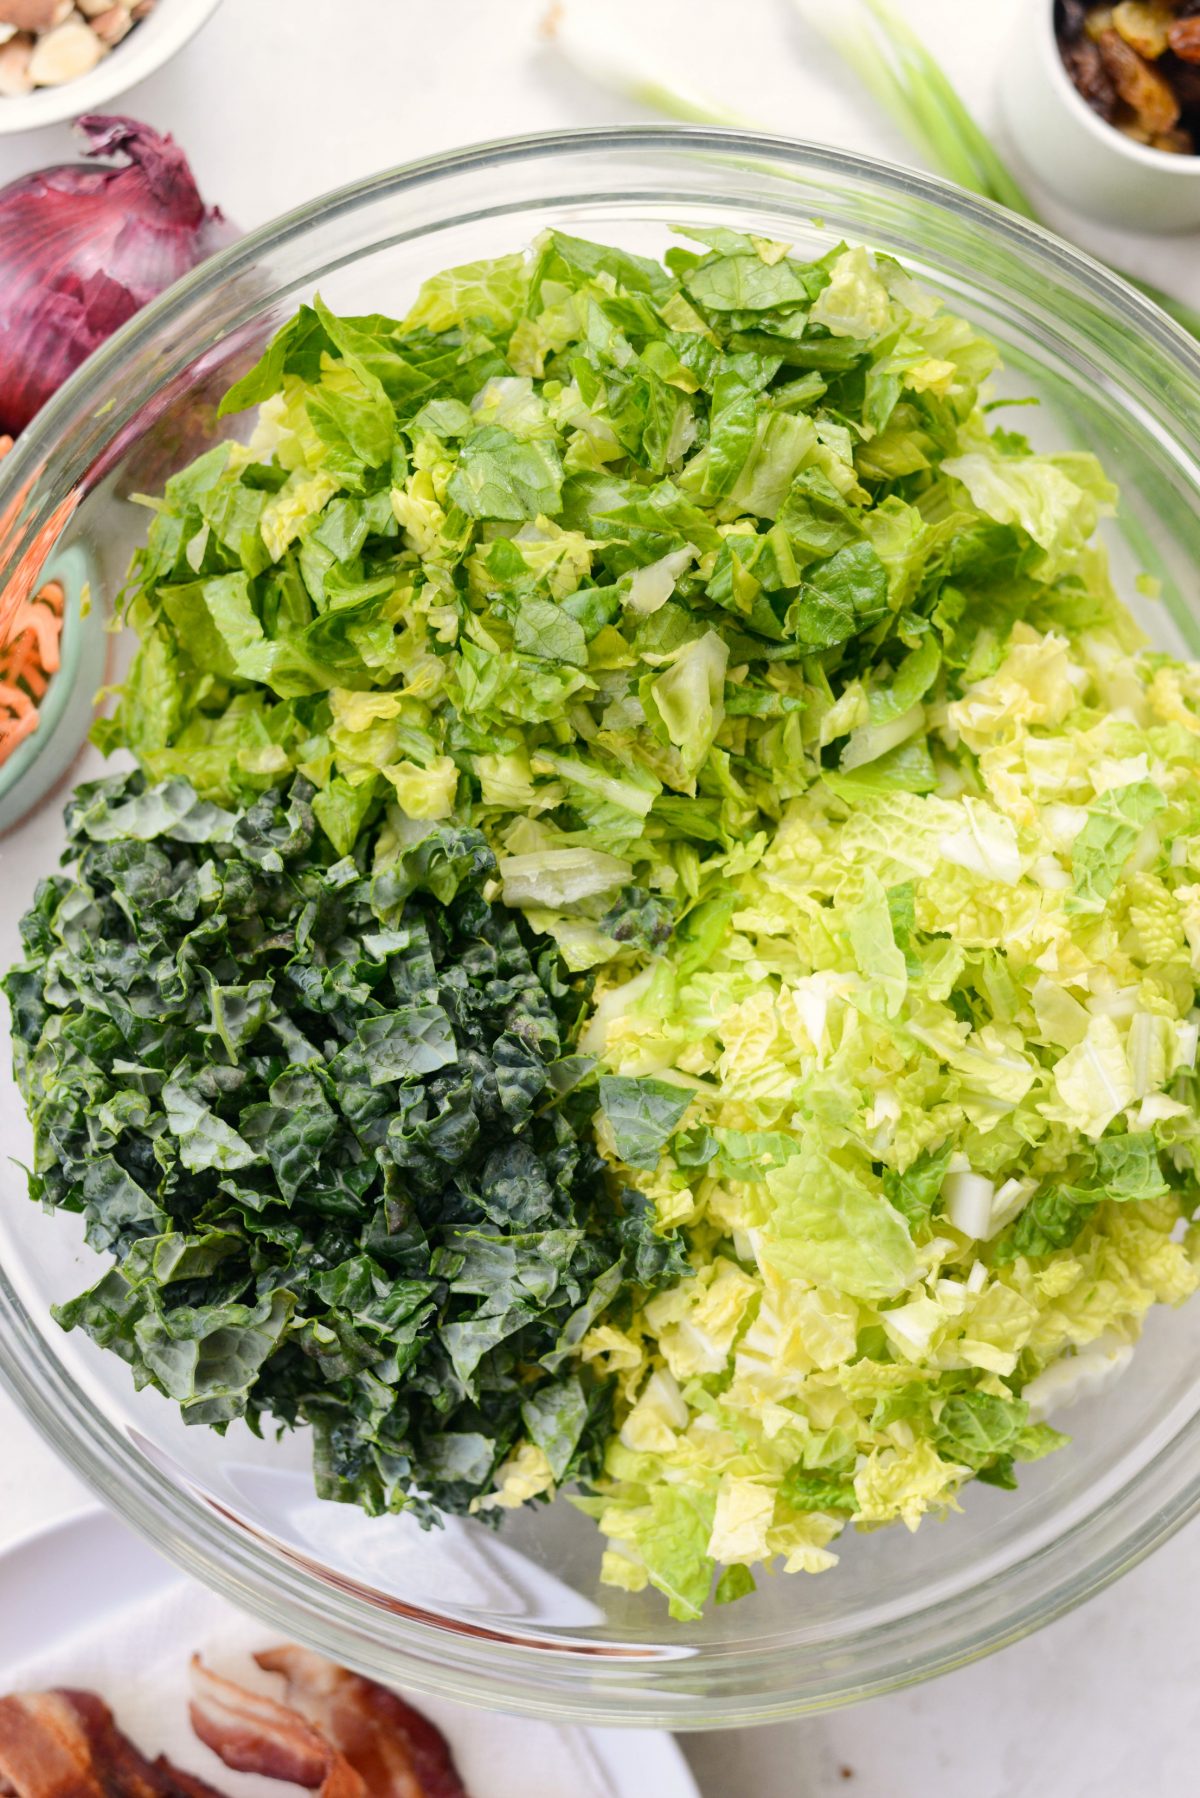 glass bowl of chopped lettuce and kale.